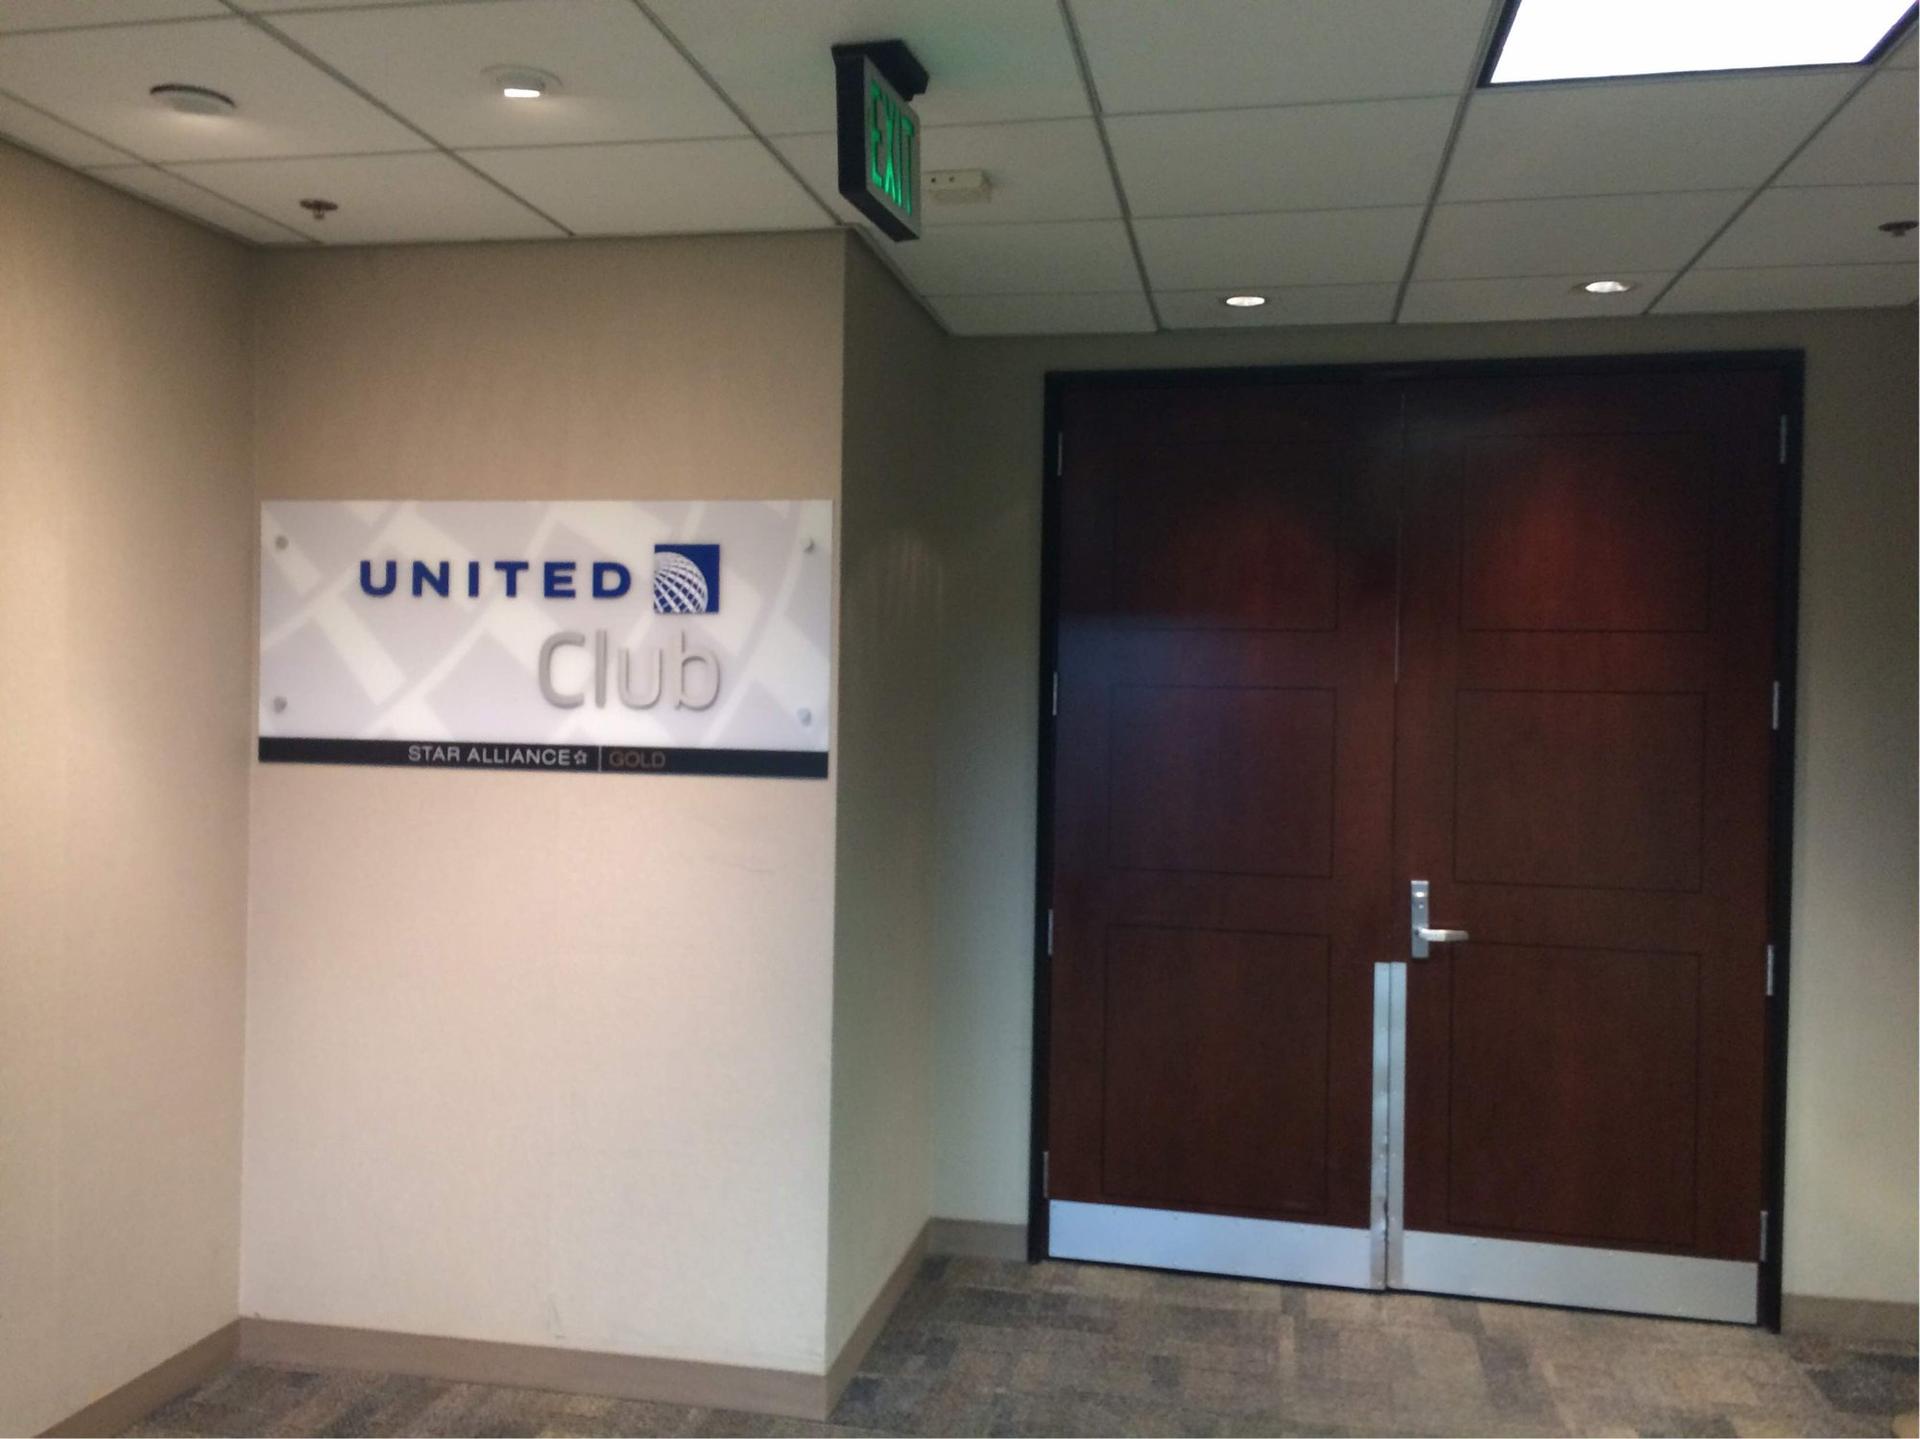 United Airlines United Club image 4 of 8